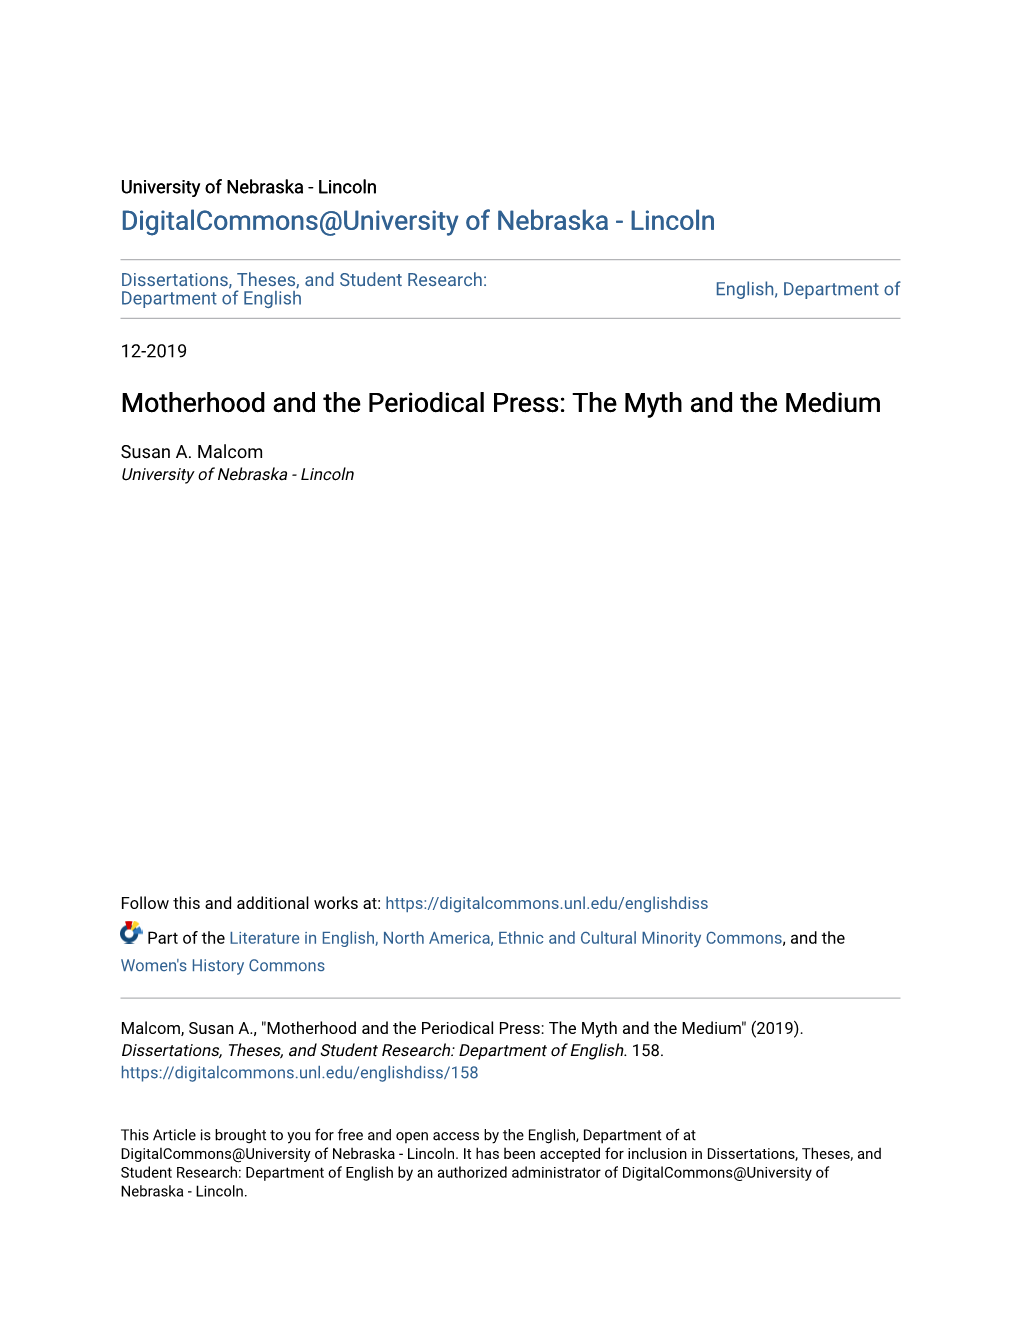 Motherhood and the Periodical Press: the Myth and the Medium